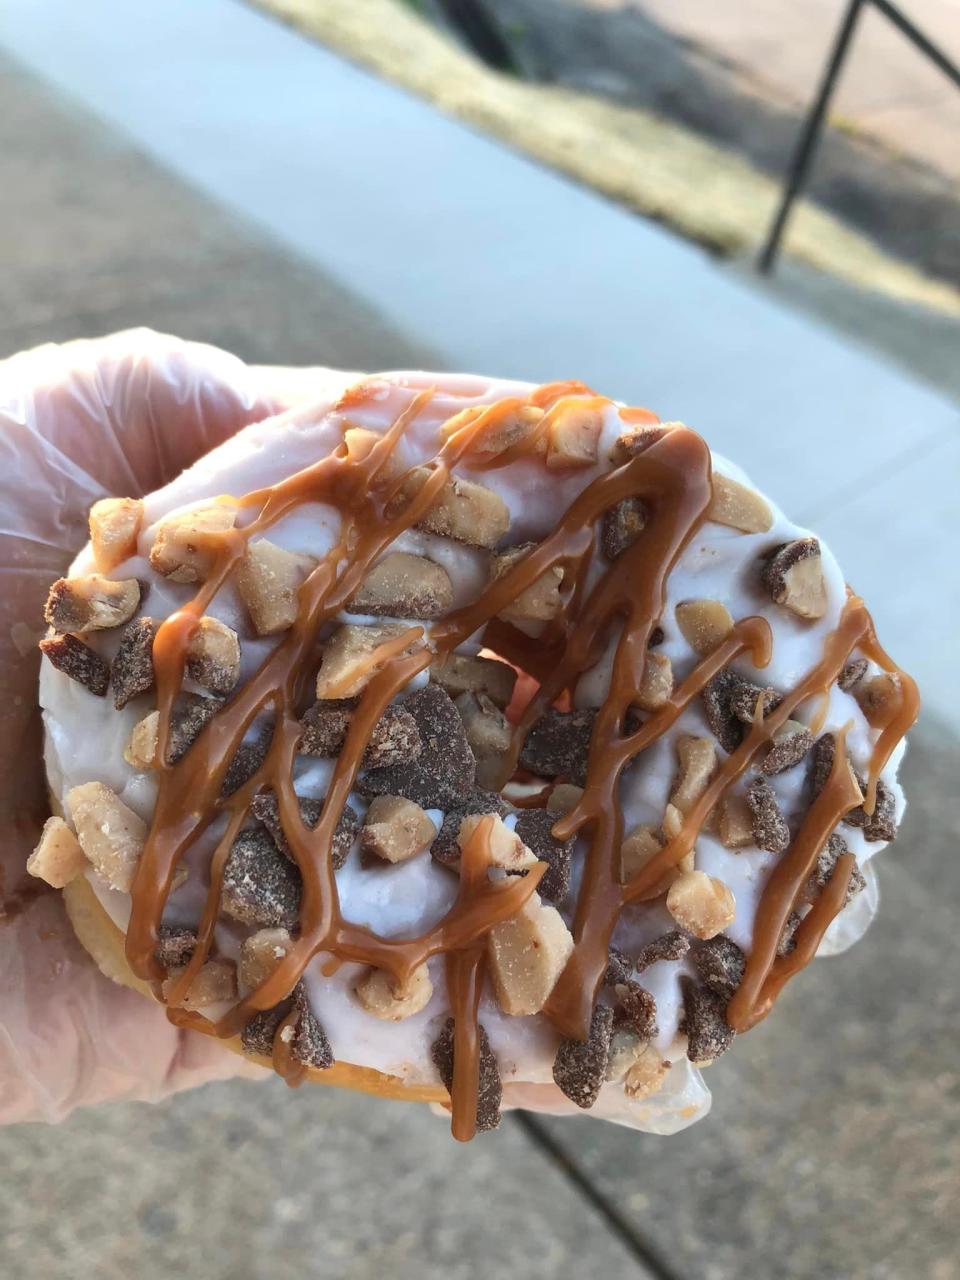 Toss Up Tuesday Donut Heath Bar donut at Dough Baby Donuts in La Grange.